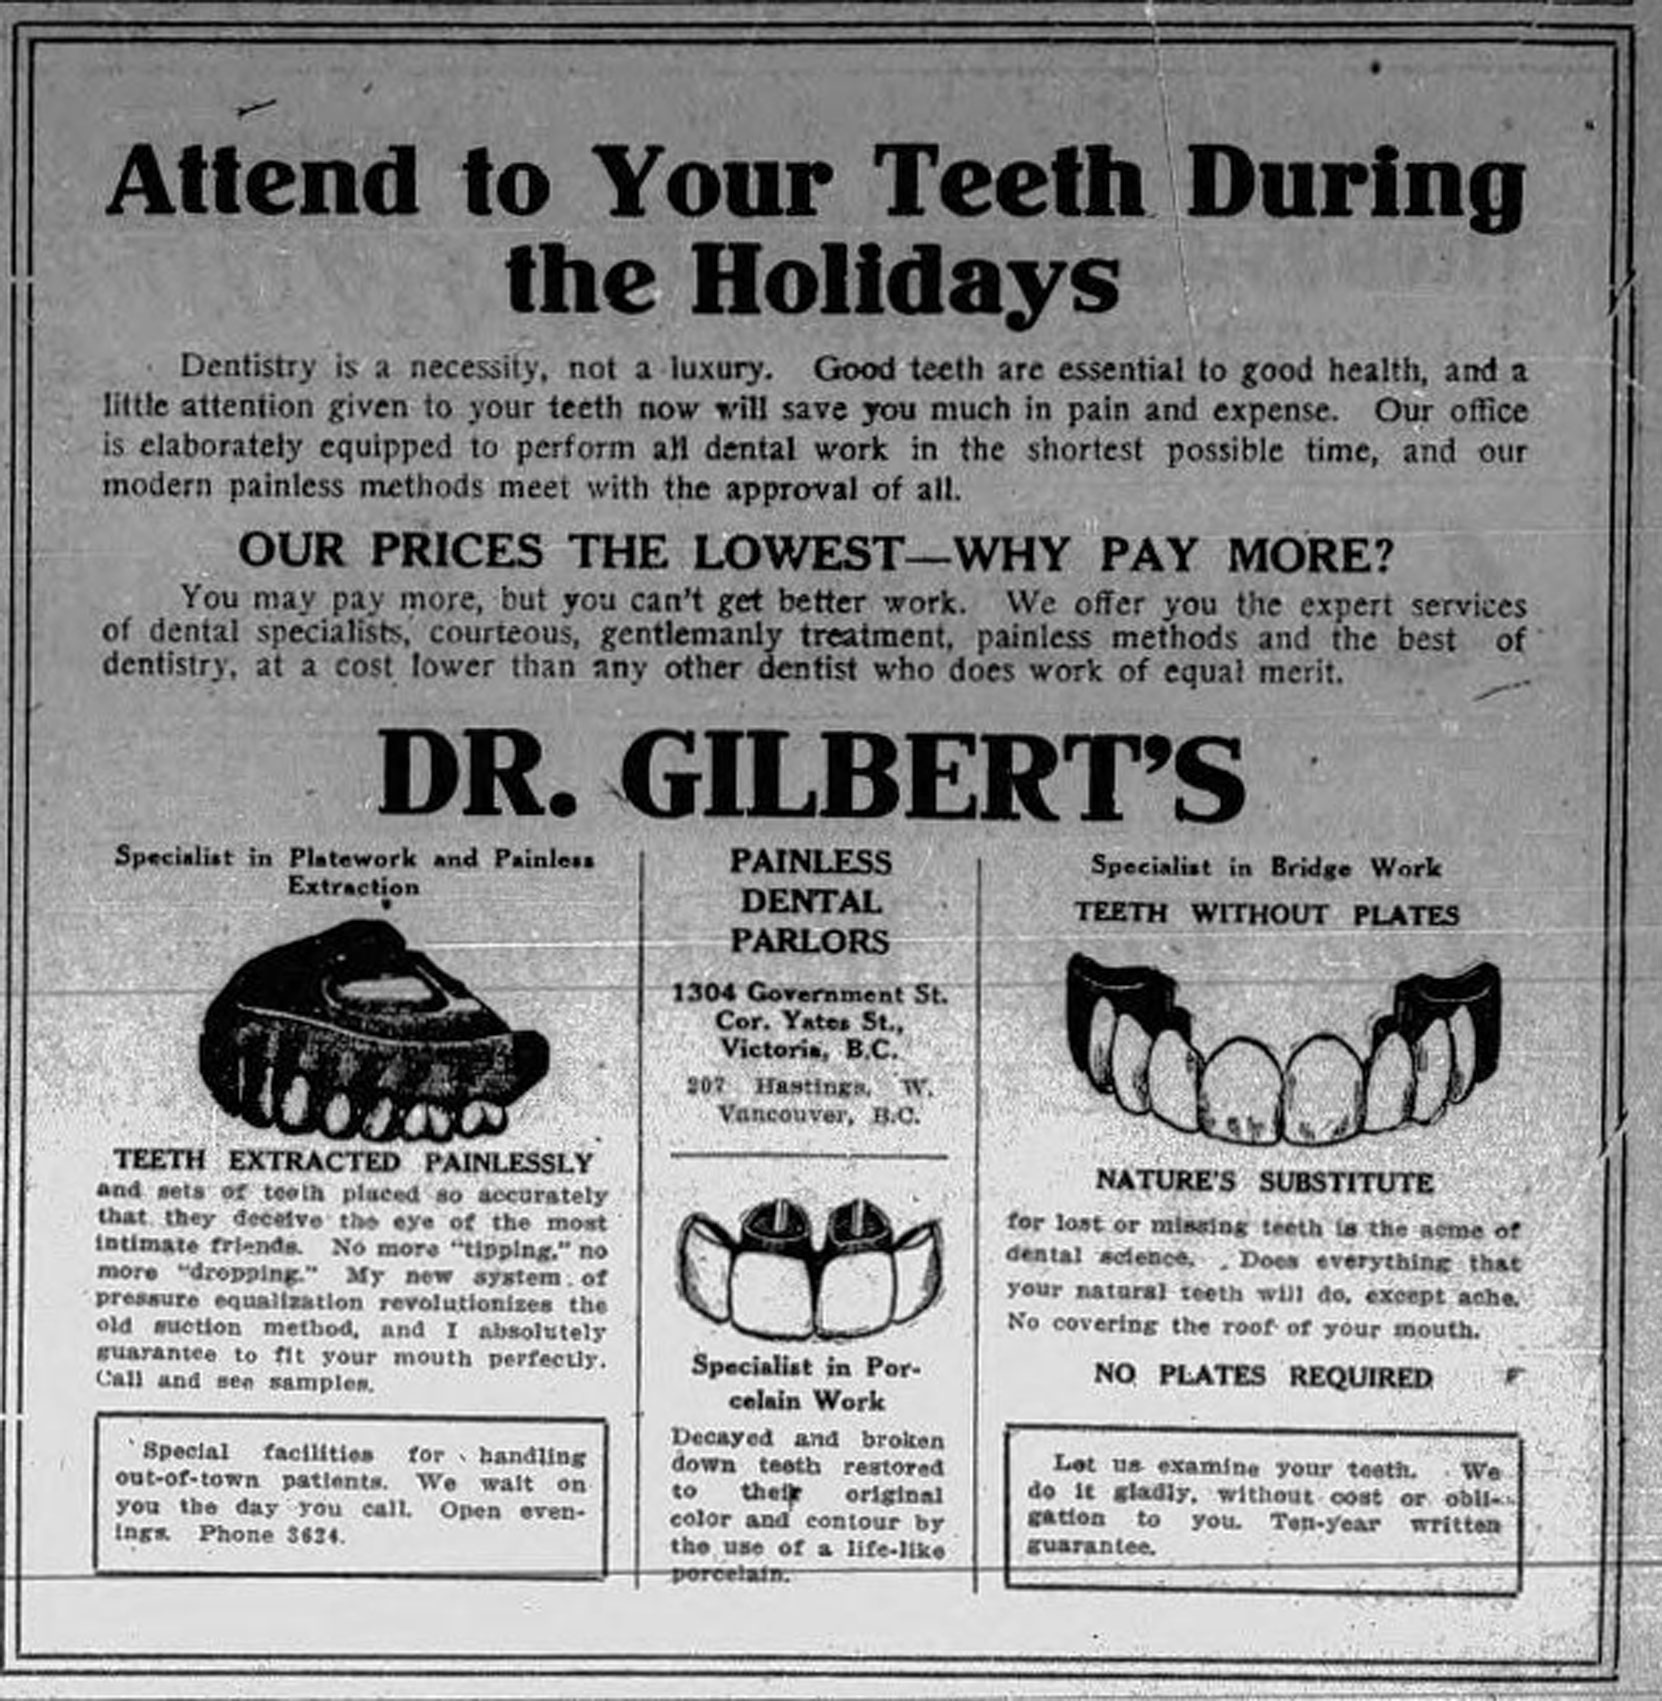 1915 Advertisement For Dr. Gilbert's Painless Dental Parlors, 1304 Douglas Street (Victoria Online Sightseeing Tours collection)